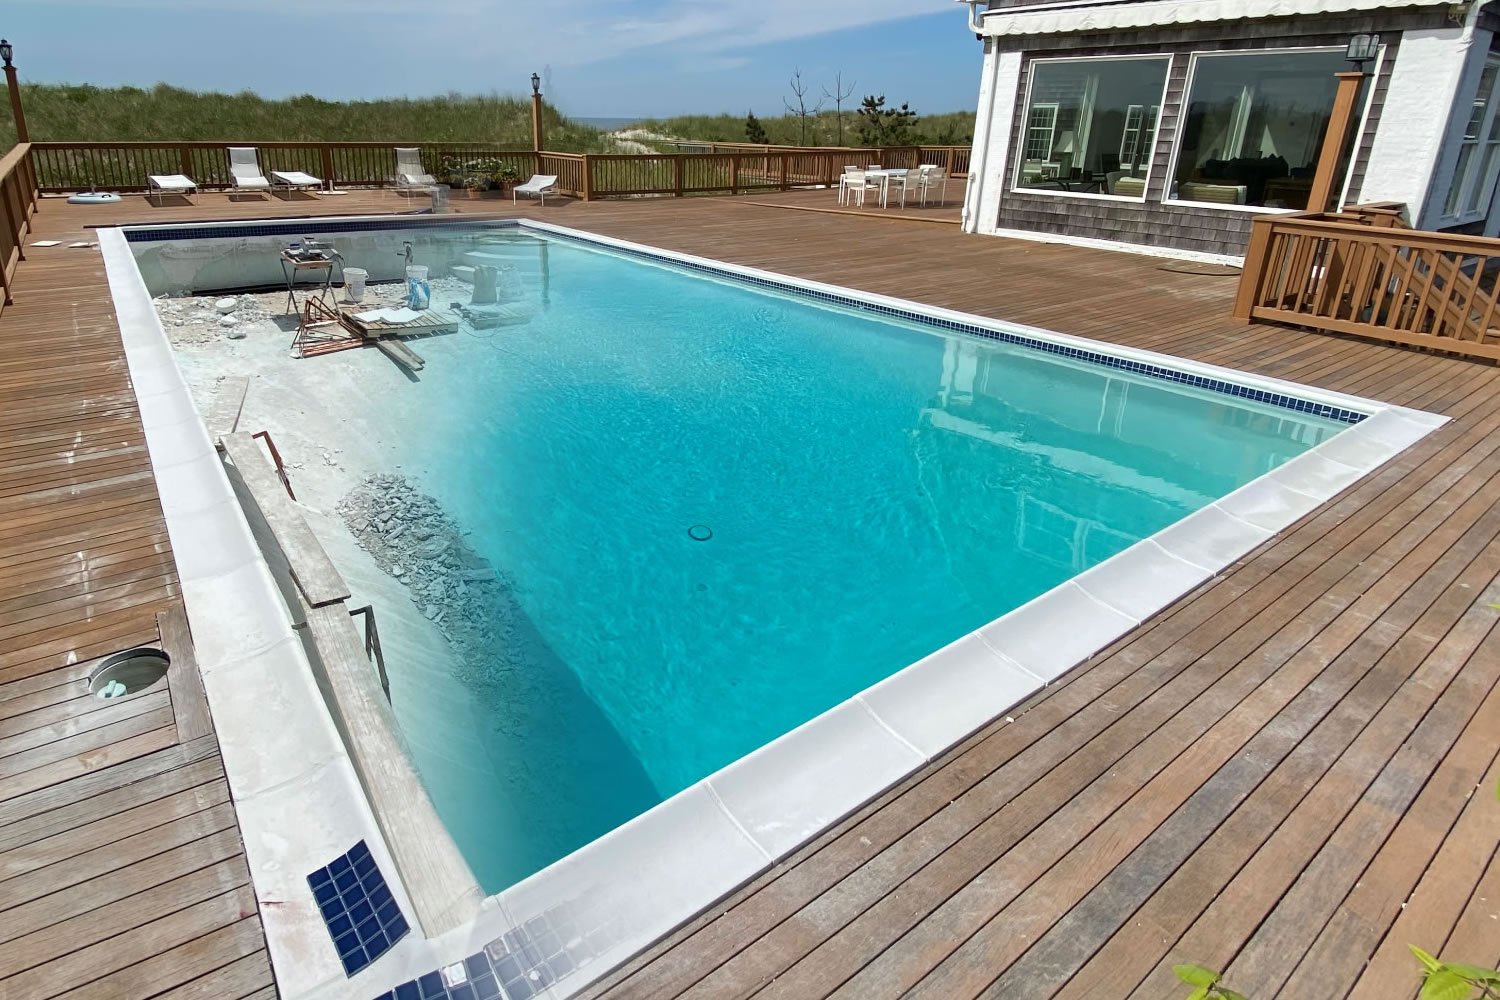 Weekly Pool Service by Shinnecock Pools Southampton Pool Service.